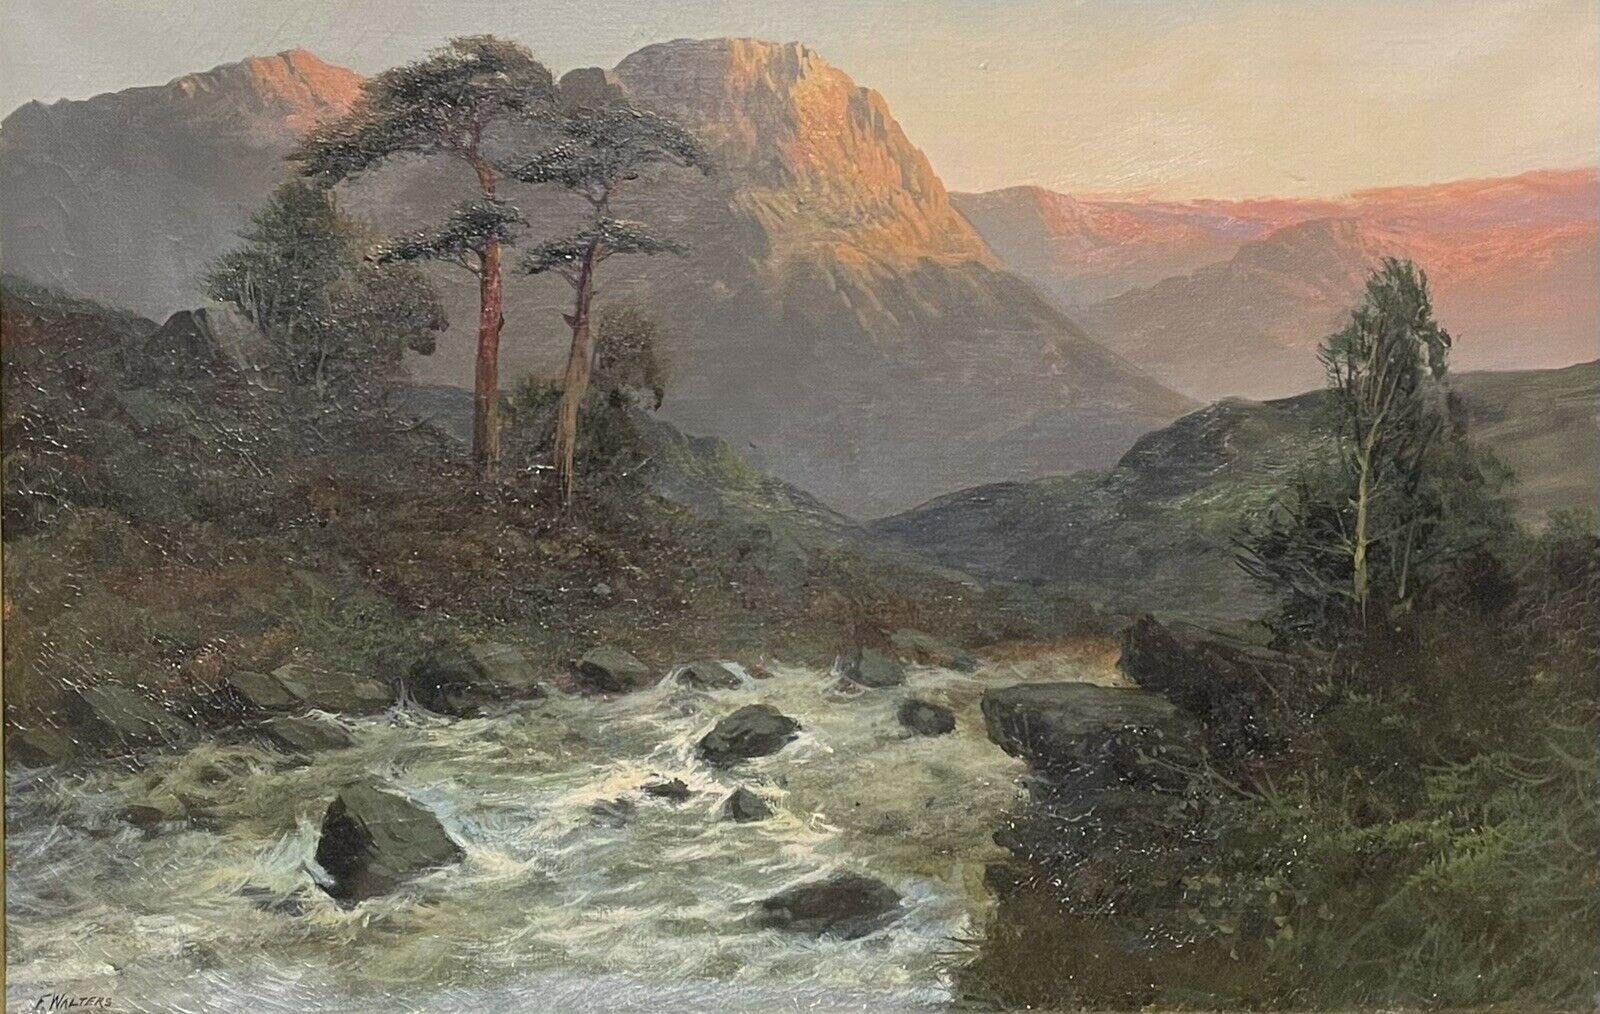 Artist/ School: British School, signed lower corner, early 20th century

Title: Sunset in the Scottish Highlands

Medium: signed oil painting on canvas, framed.

framed: 25.25 x 35.25 inches
canvas: 20 x 30 inches

Provenance: private collection,